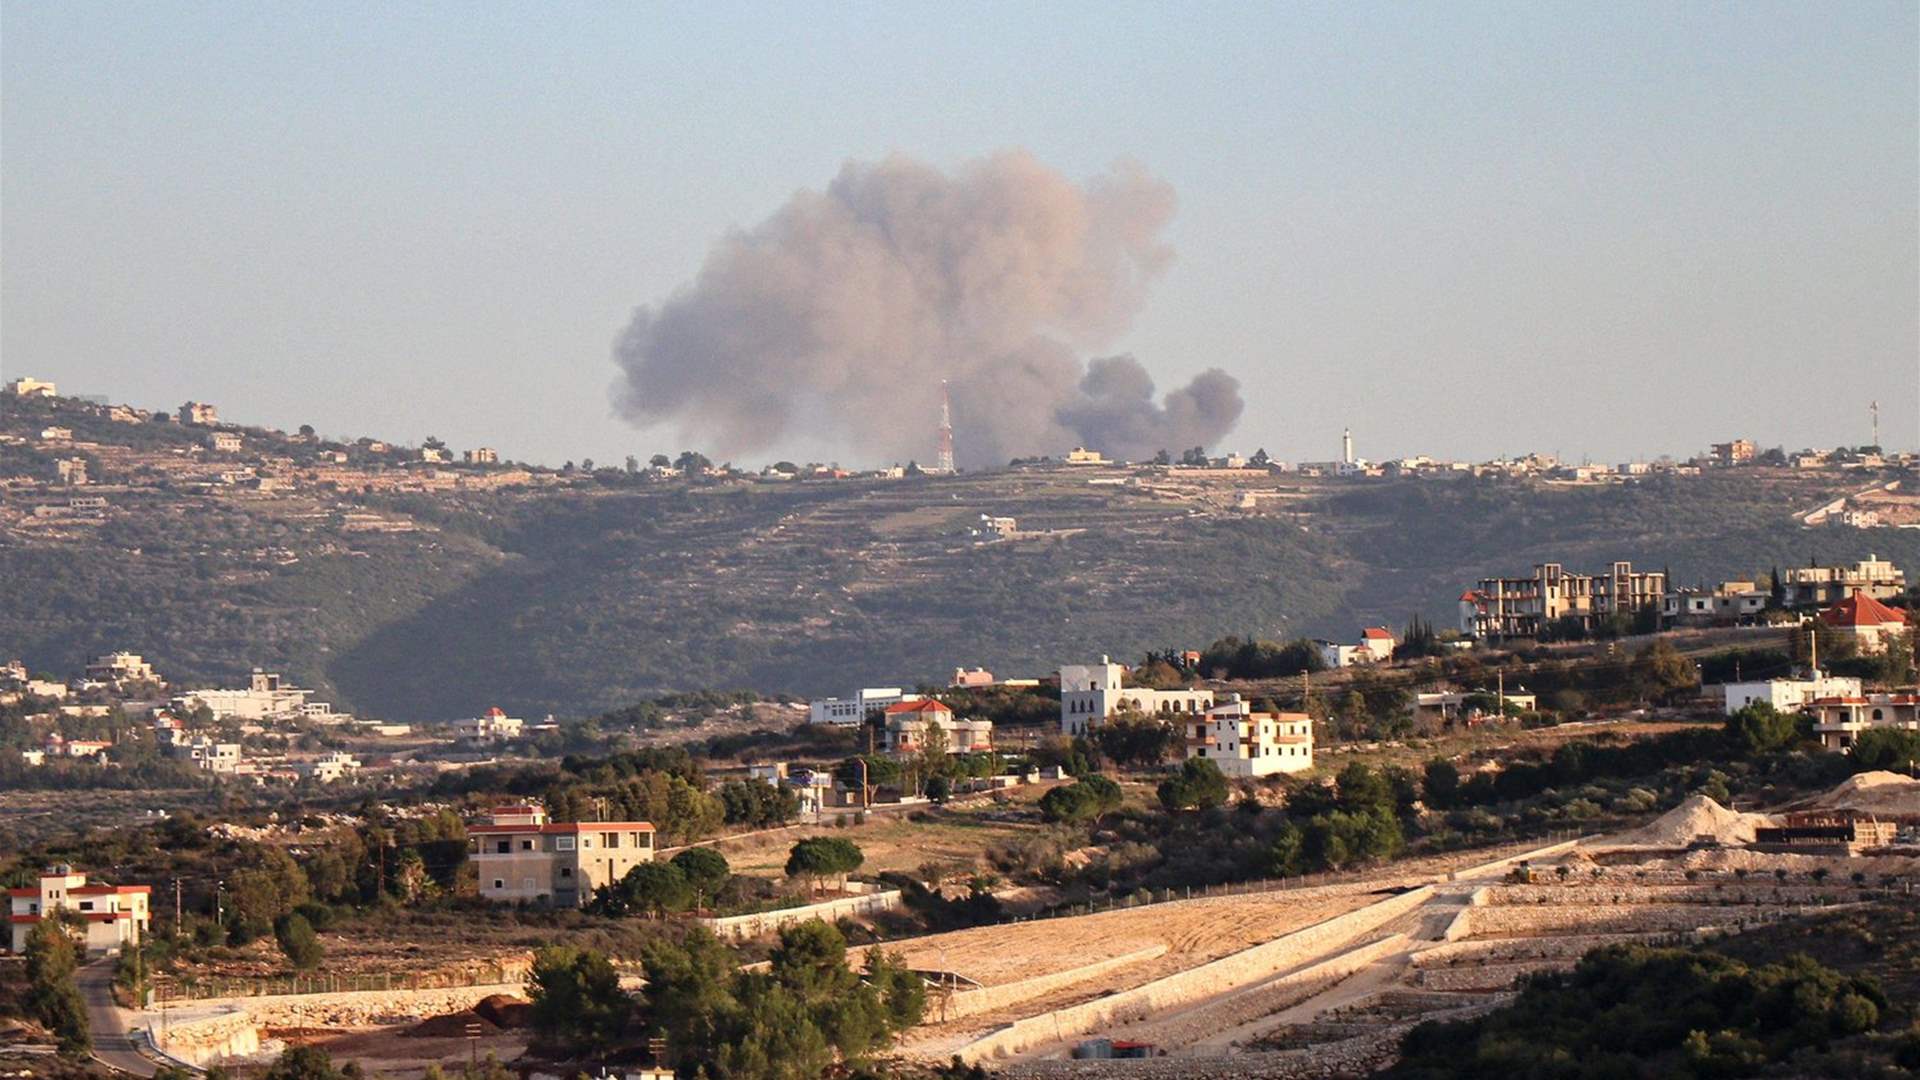 One Lebanese Army soldier killed by an Israeli shelling targeting their position